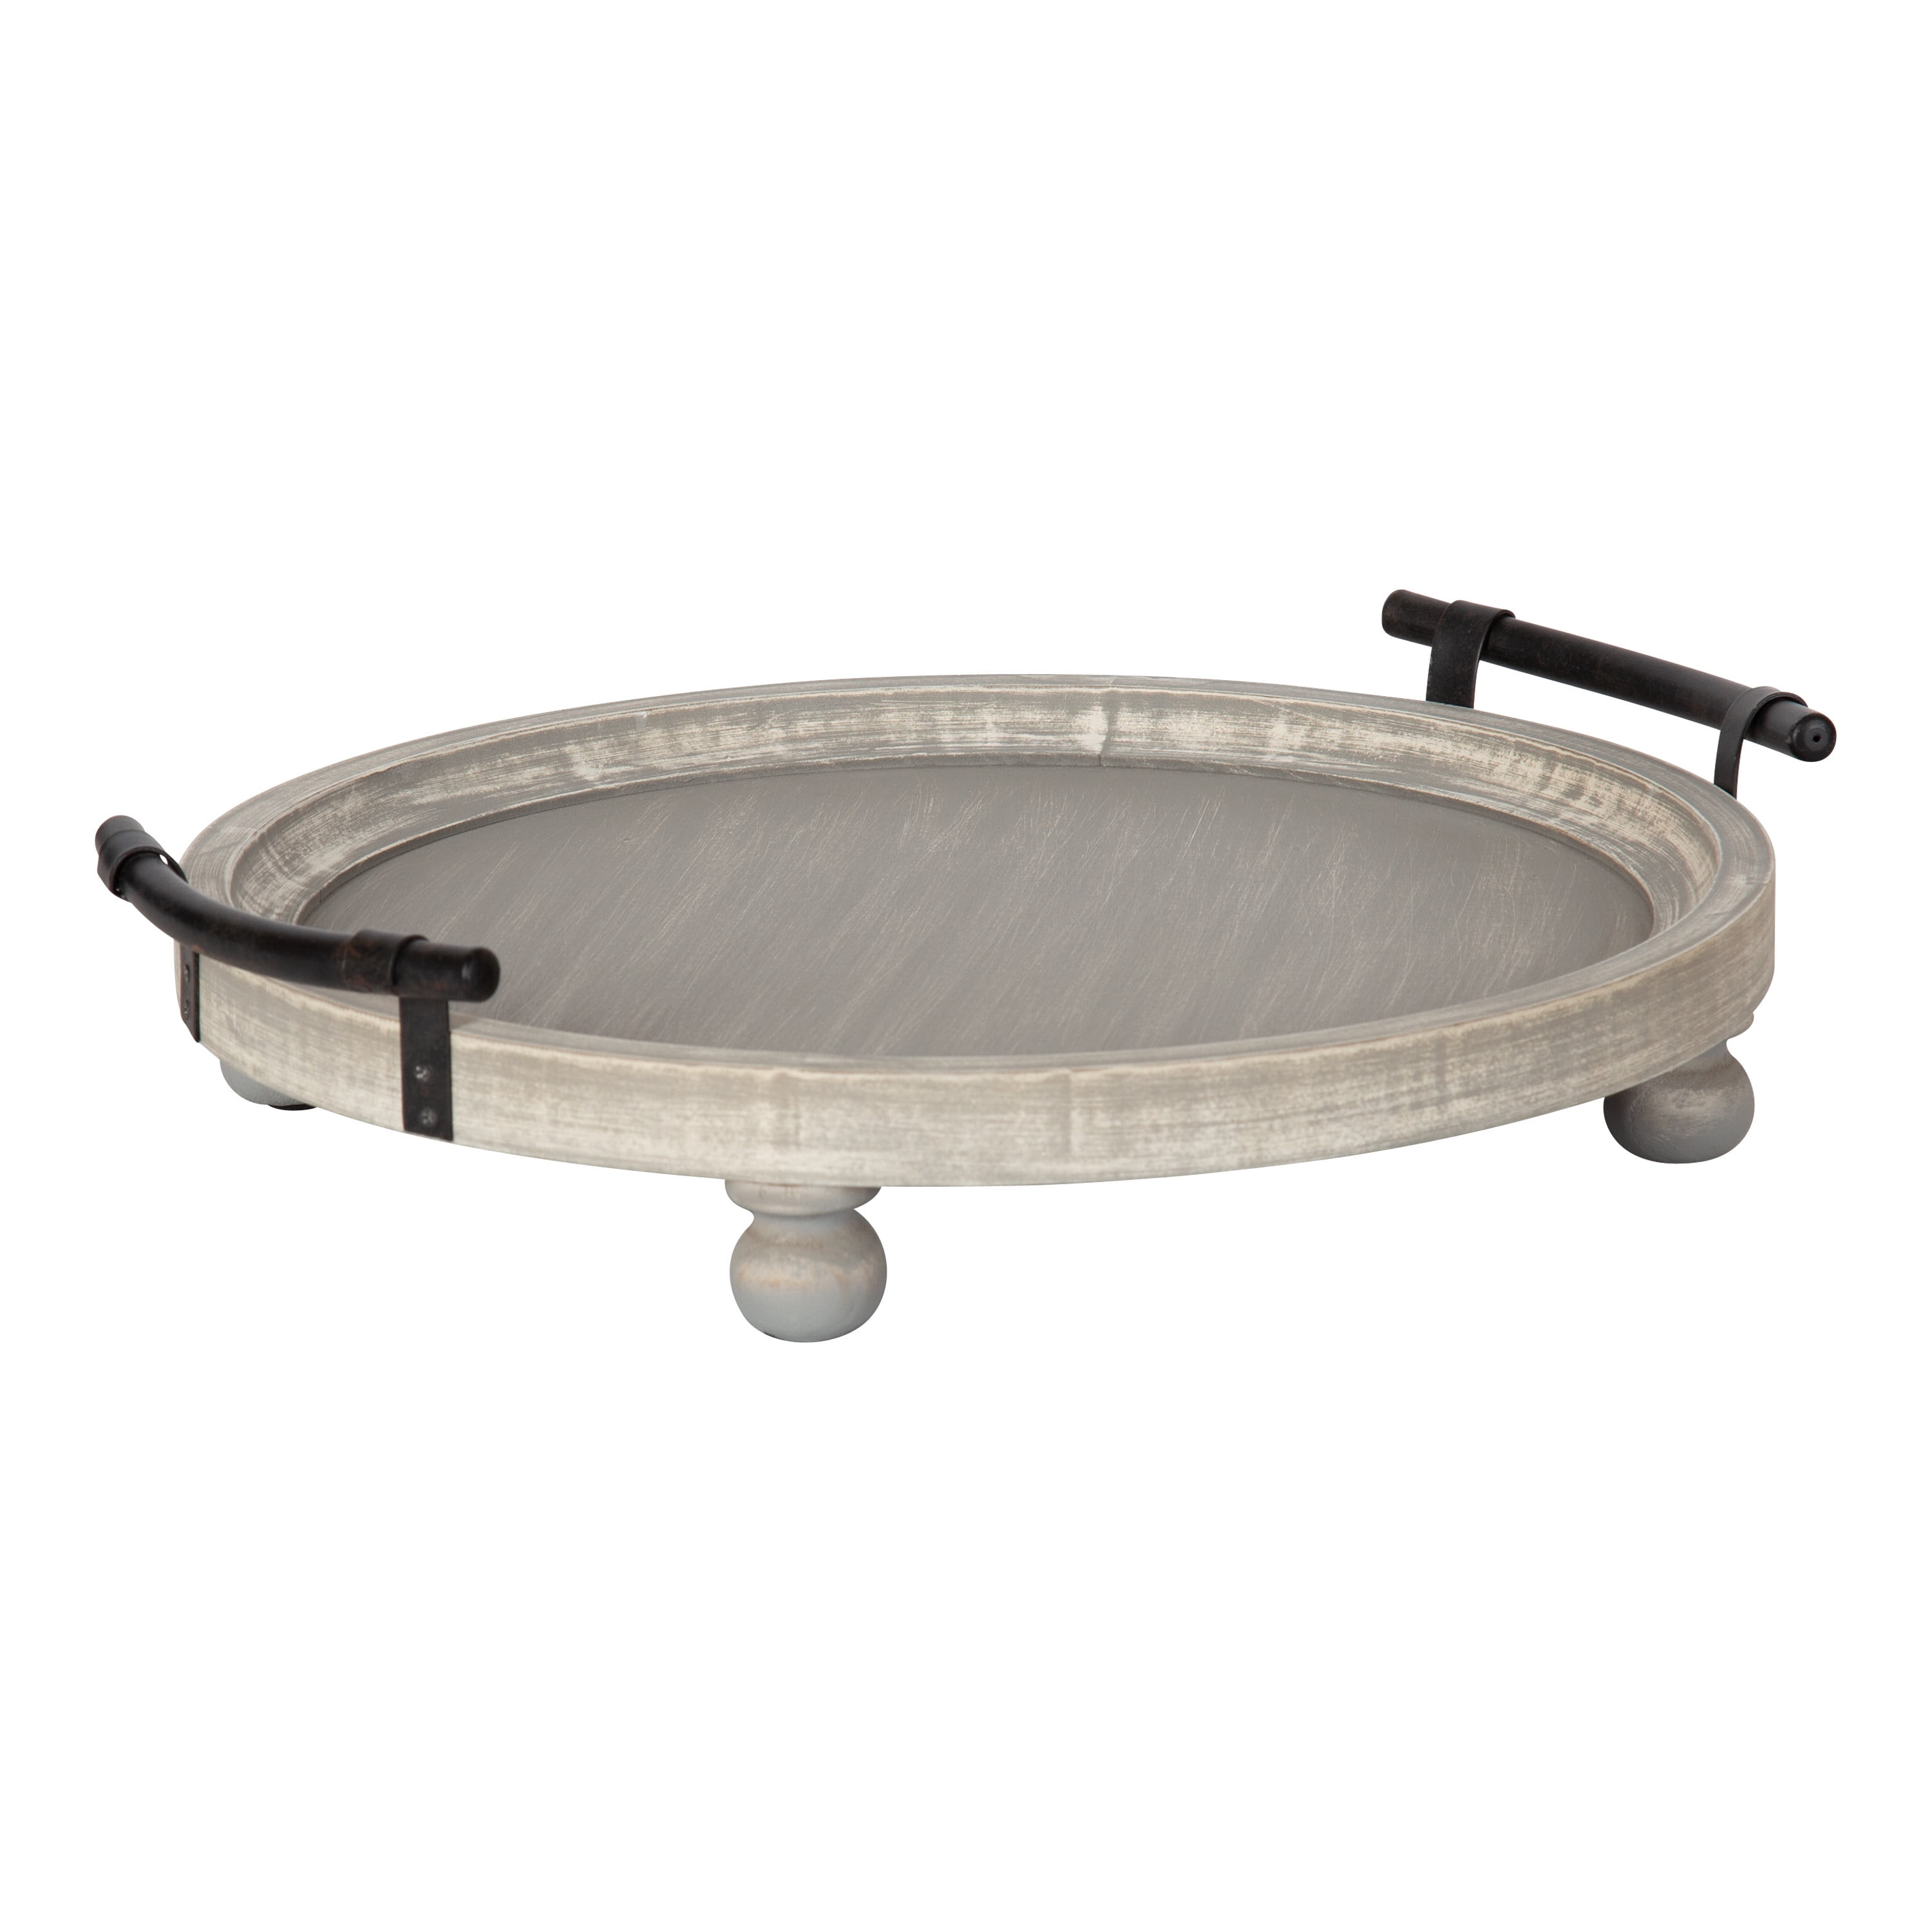 Kate and Laurel Bruillet Farmhouse Round Tray, 15 inch Diameter, Rustic  Gray, Wooden Tray for Coffee Table 